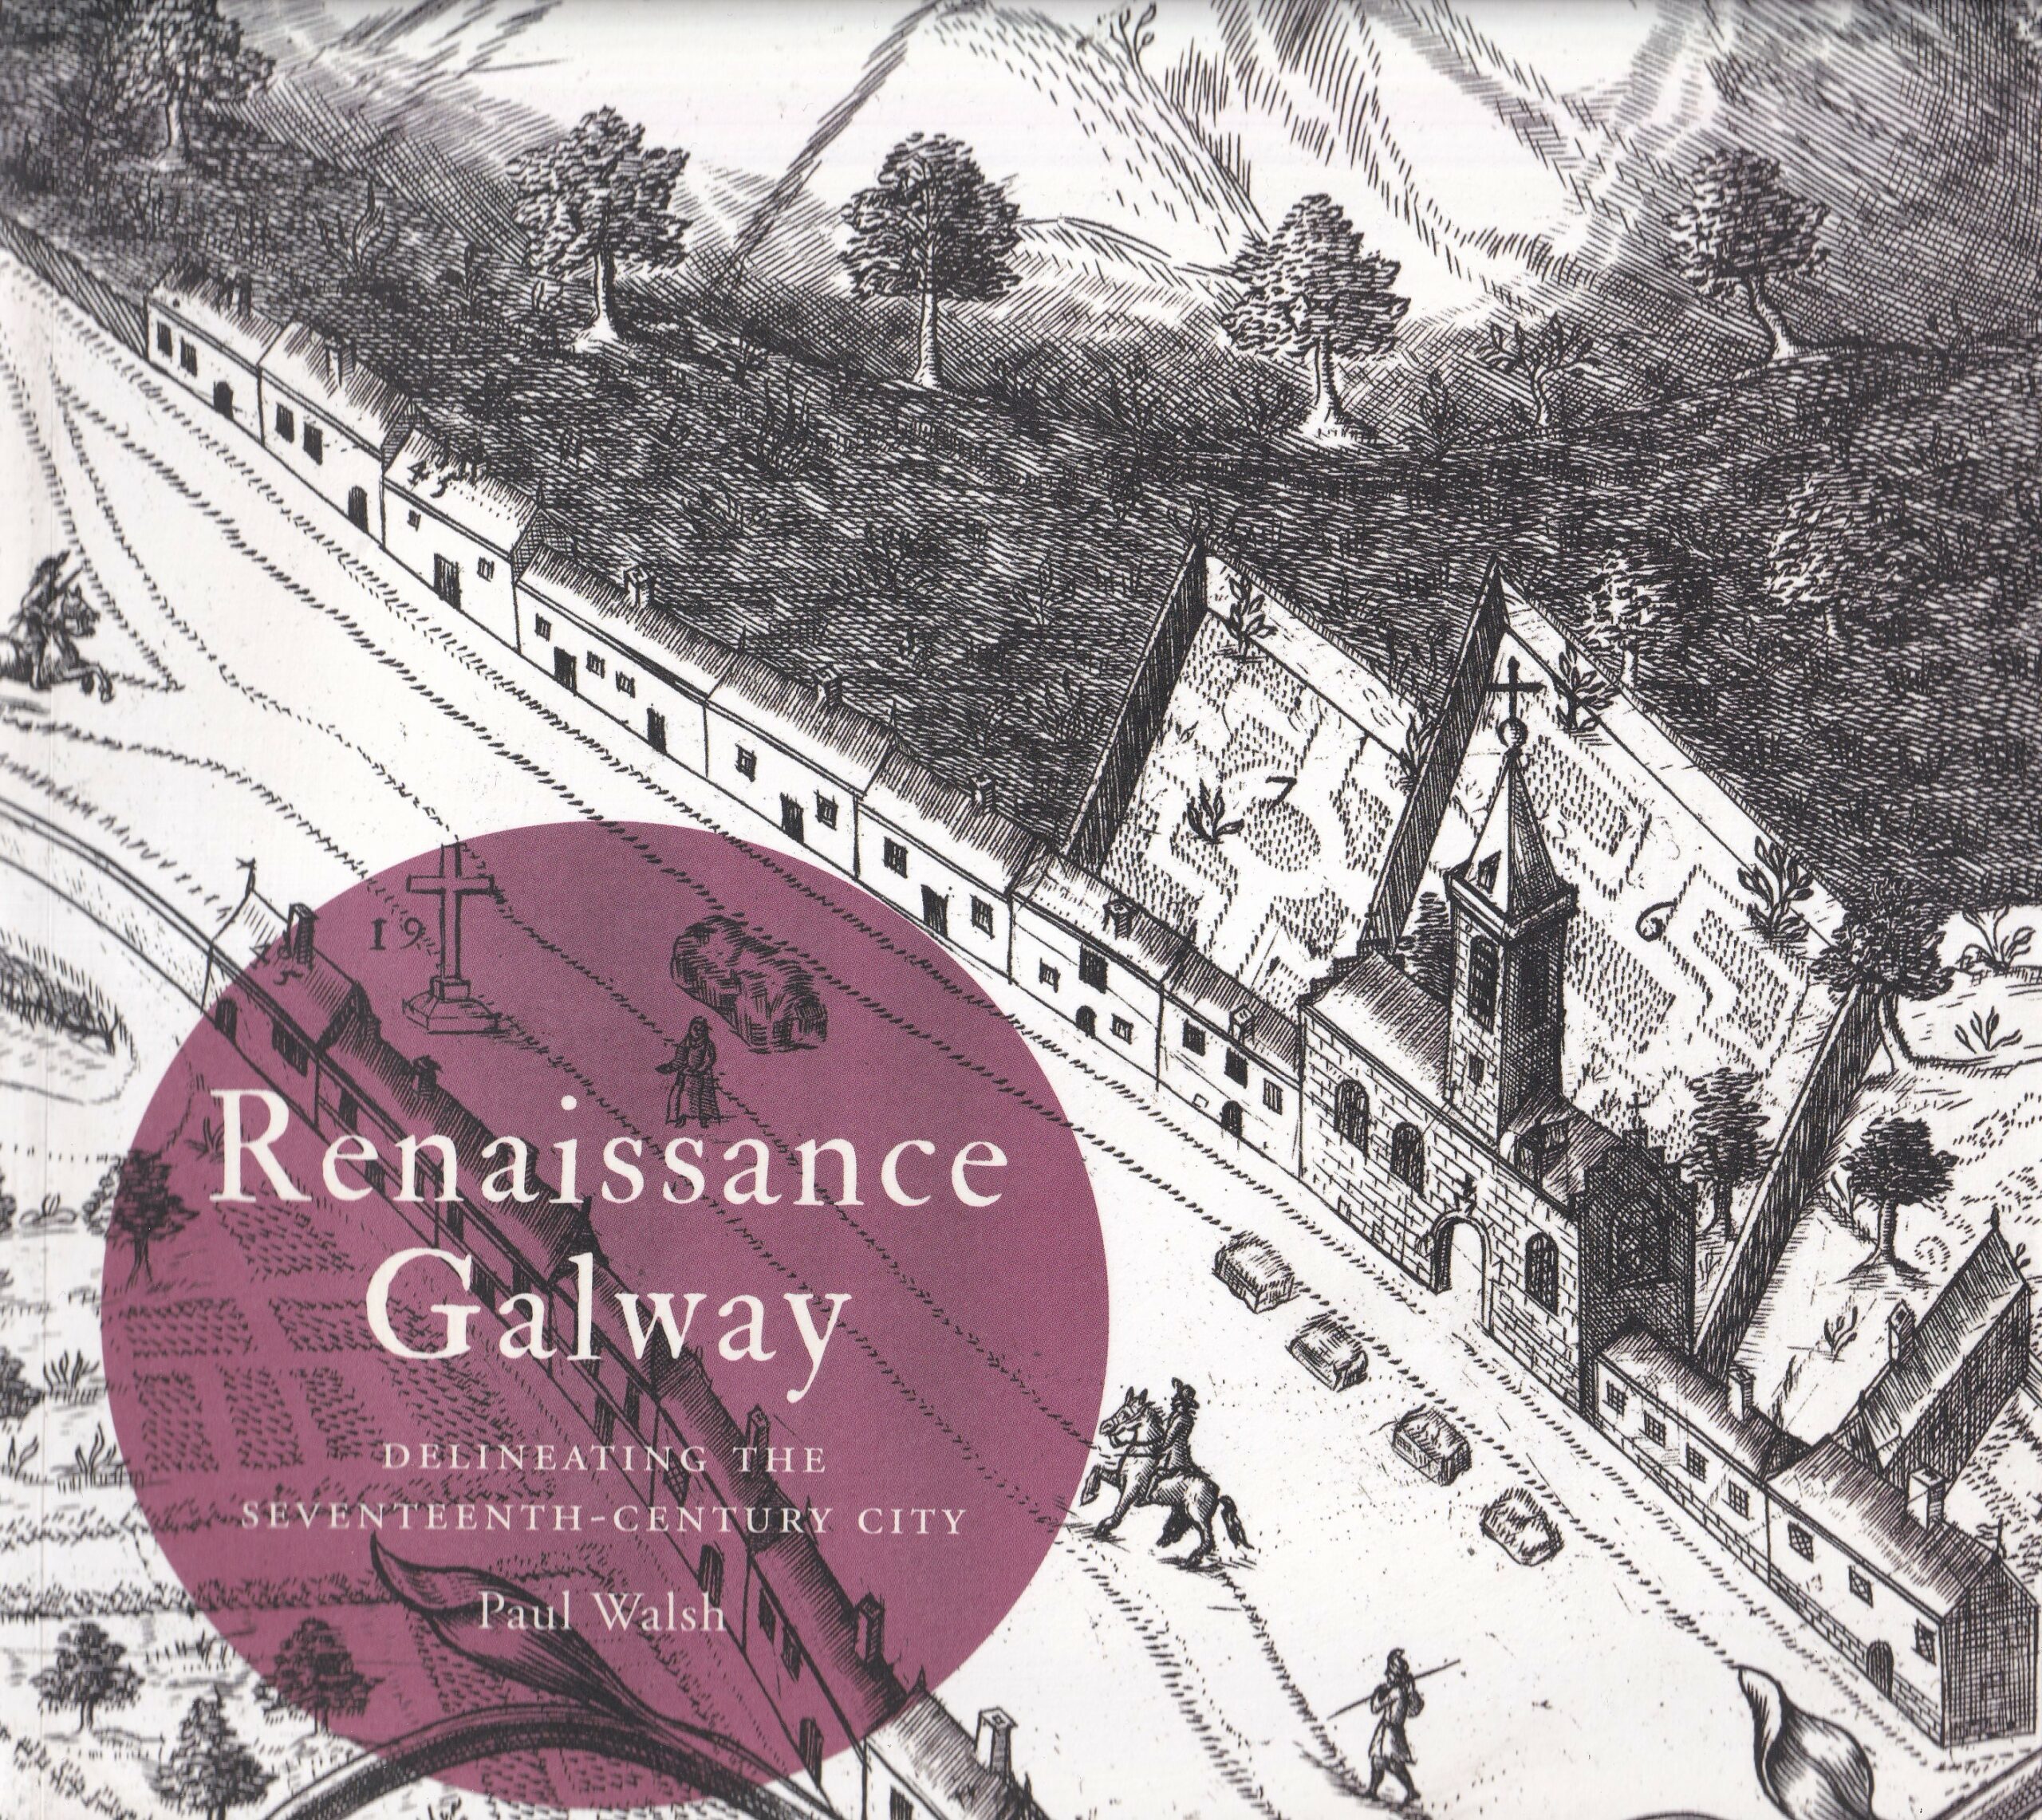 Renaissance Galway: Delineating the Seventeenth-Century City- Signed by Paul Walsh